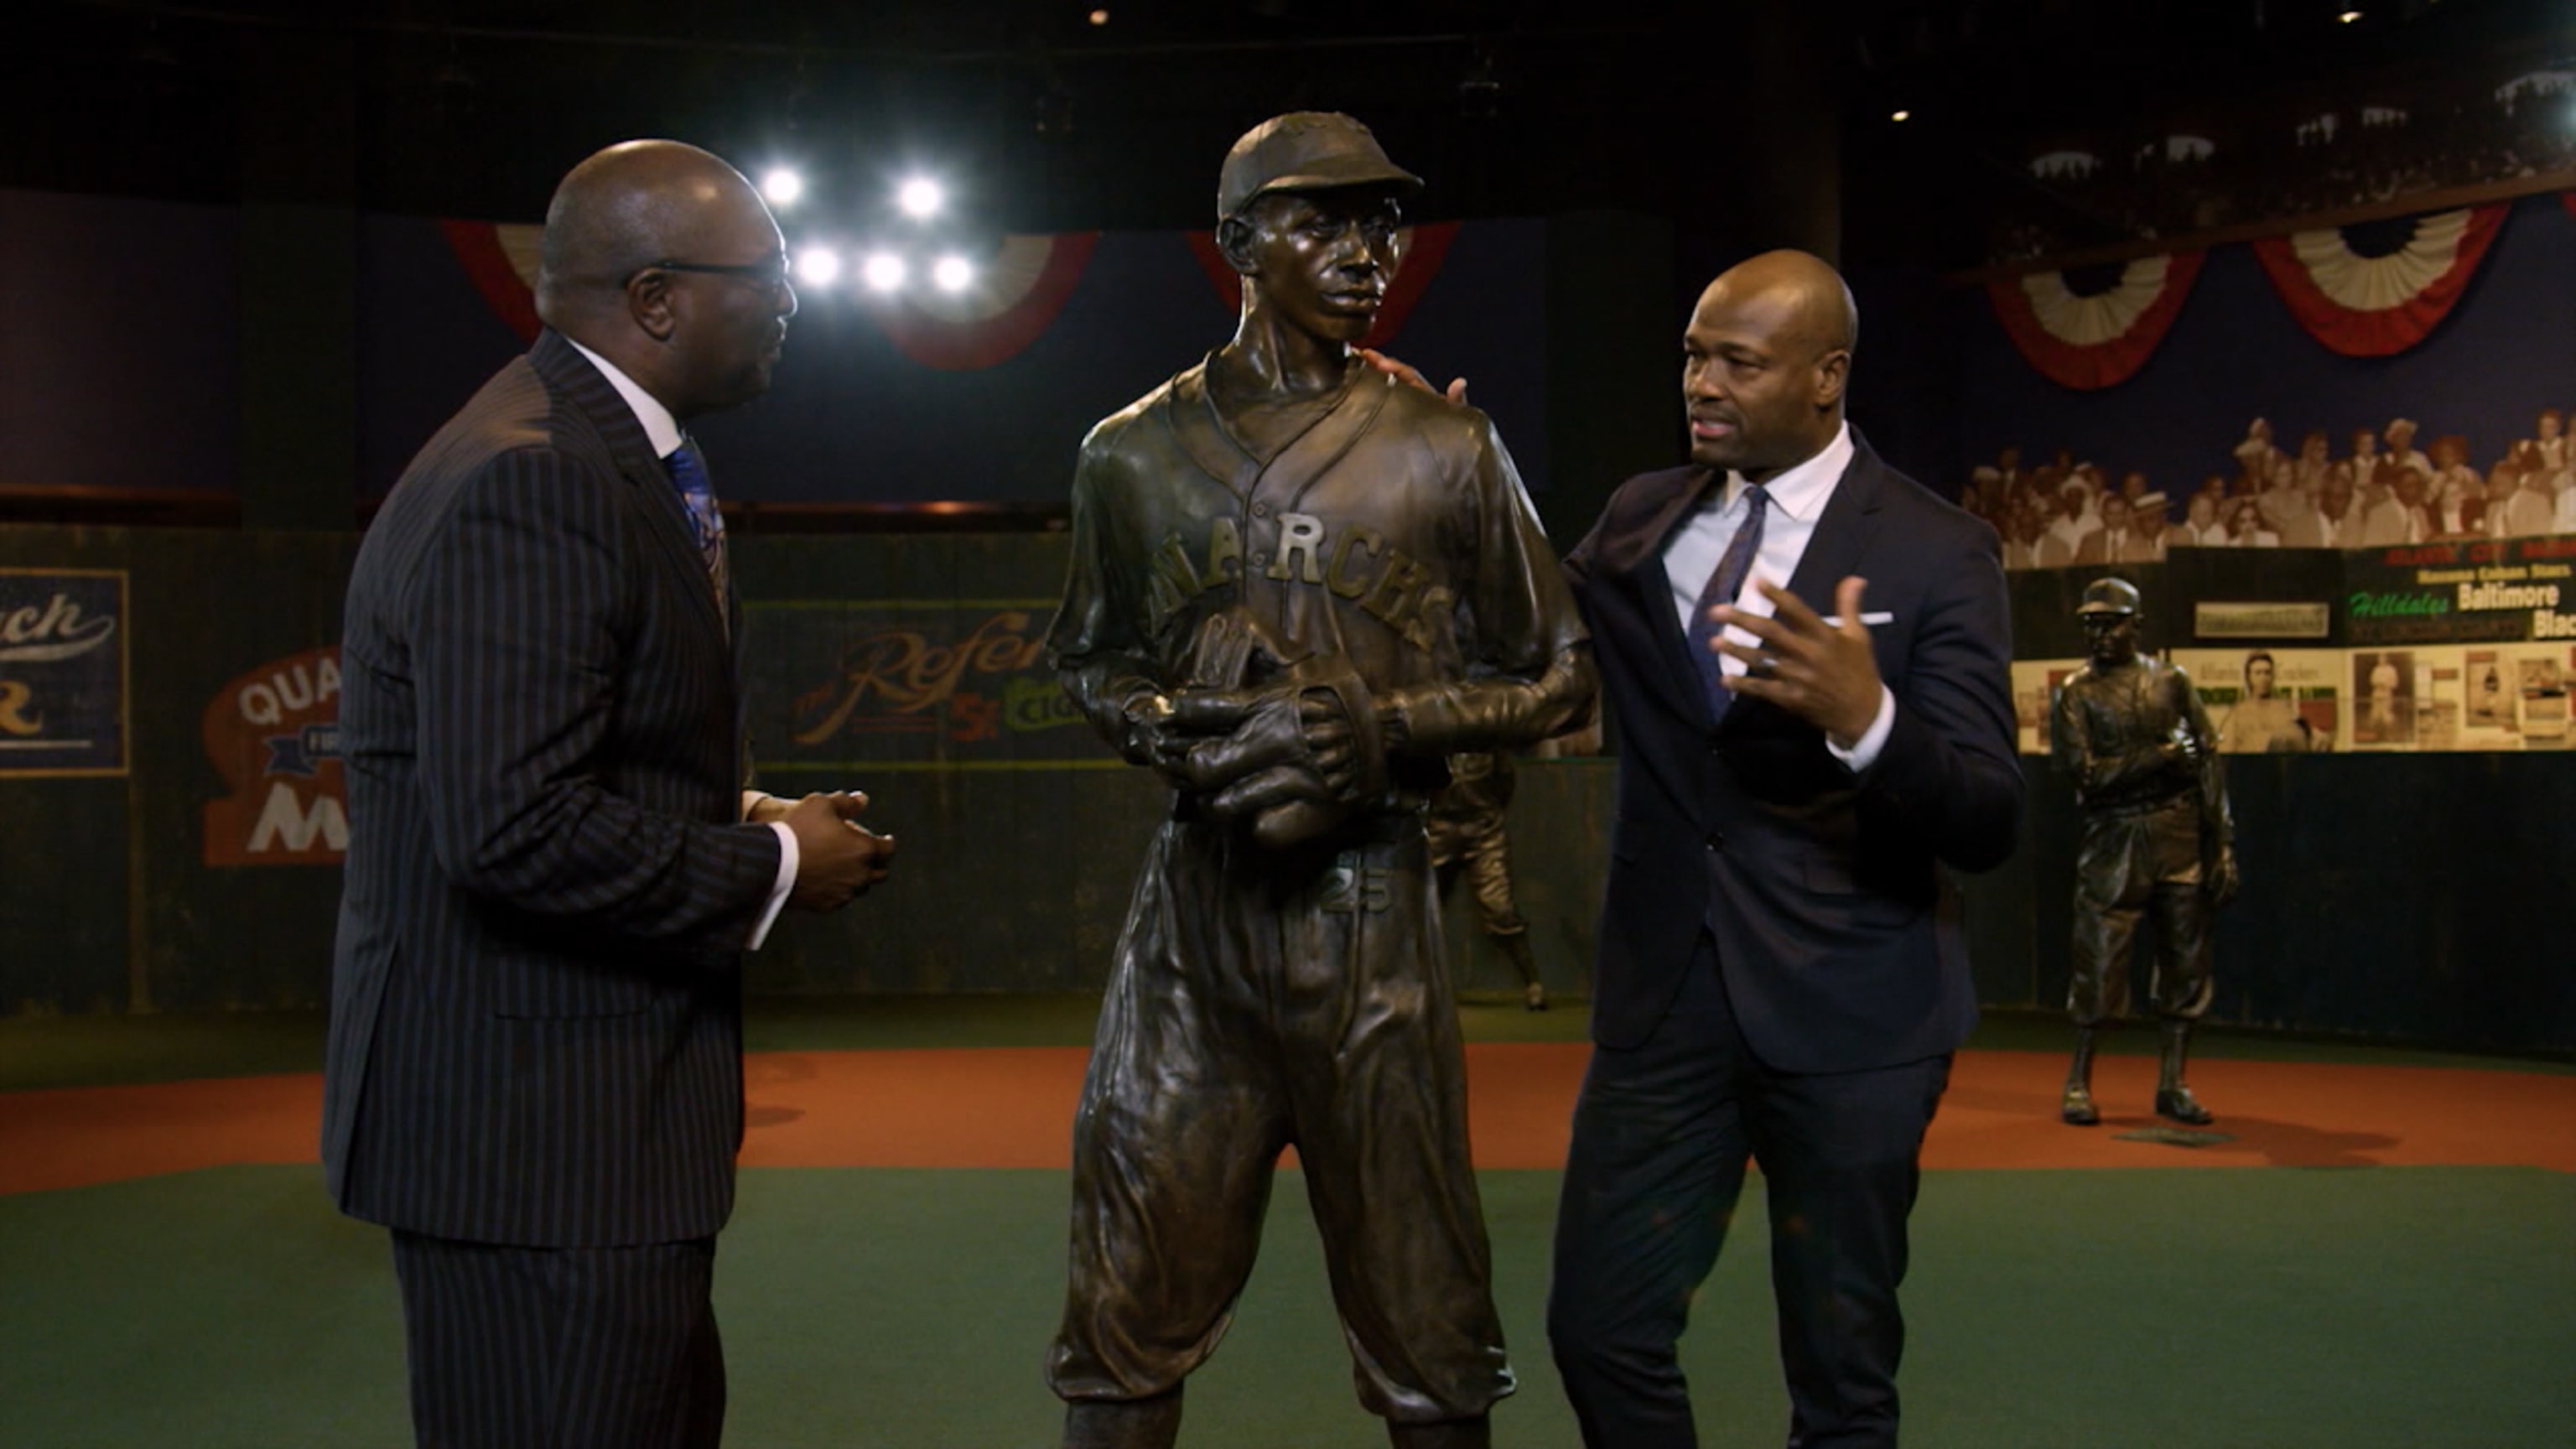 Former Negro League and current National League players stand